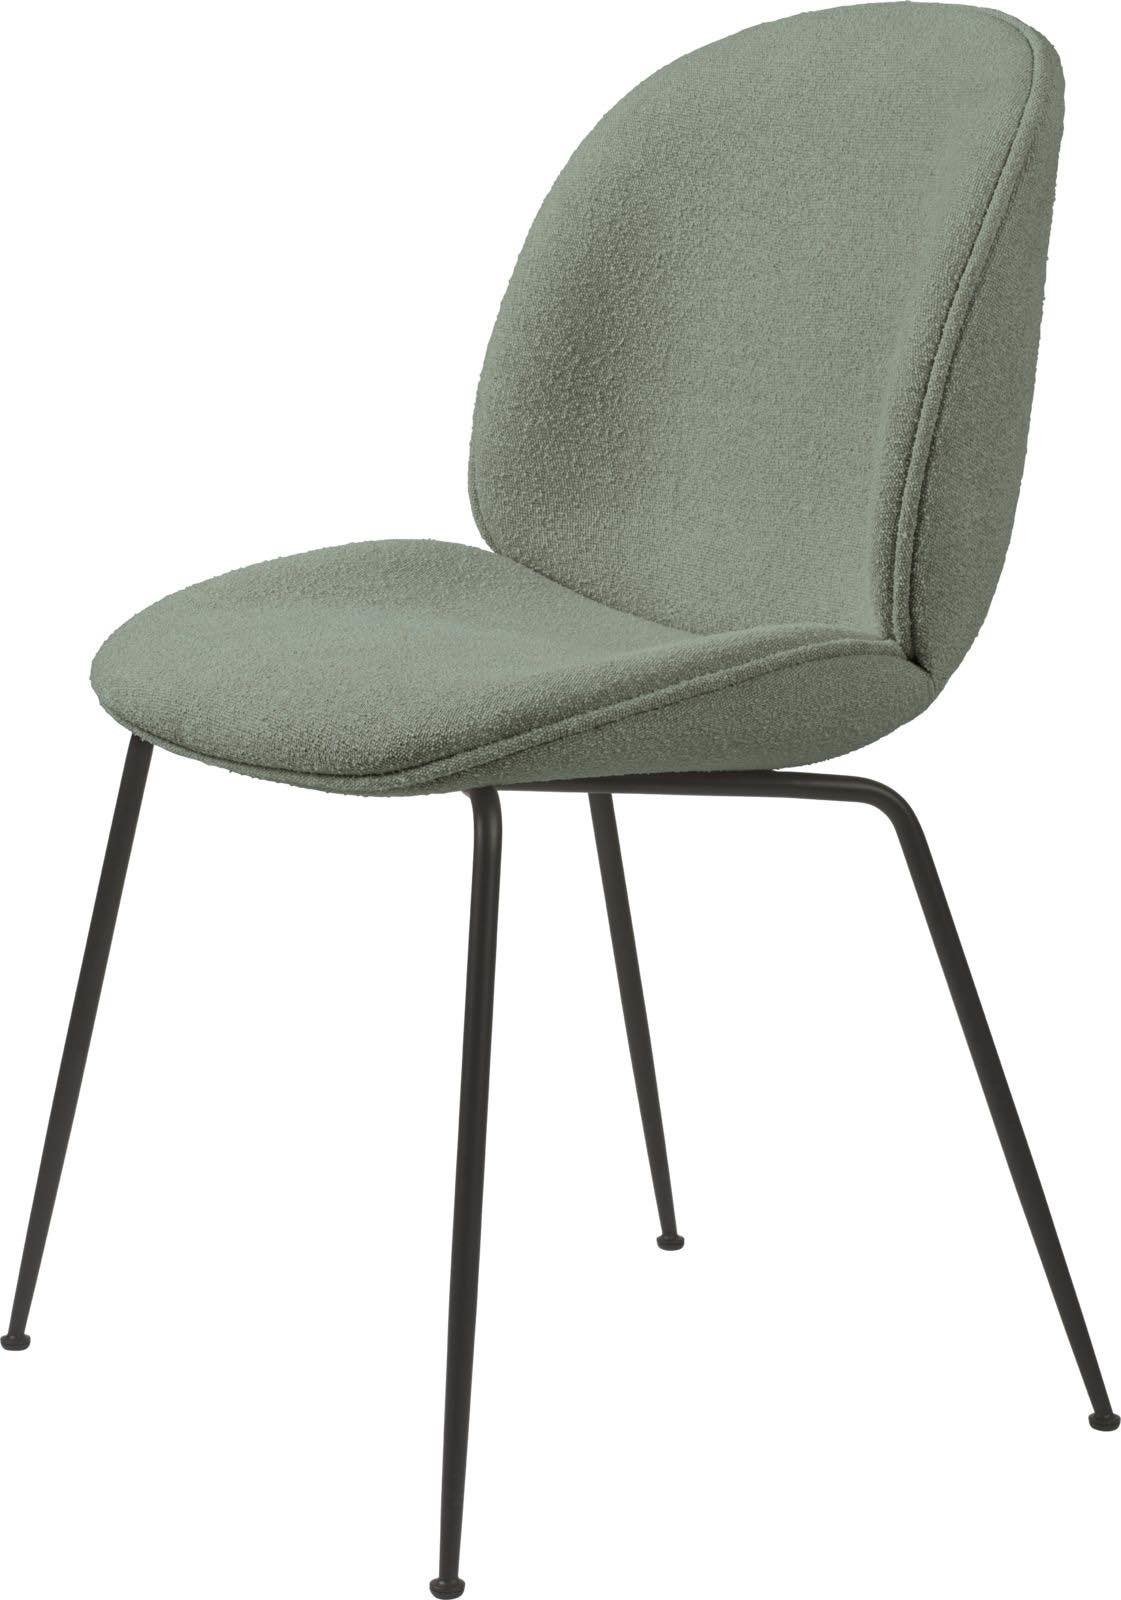 Gubi Beetle Dining Chair - Fully Upholstered - Conic base